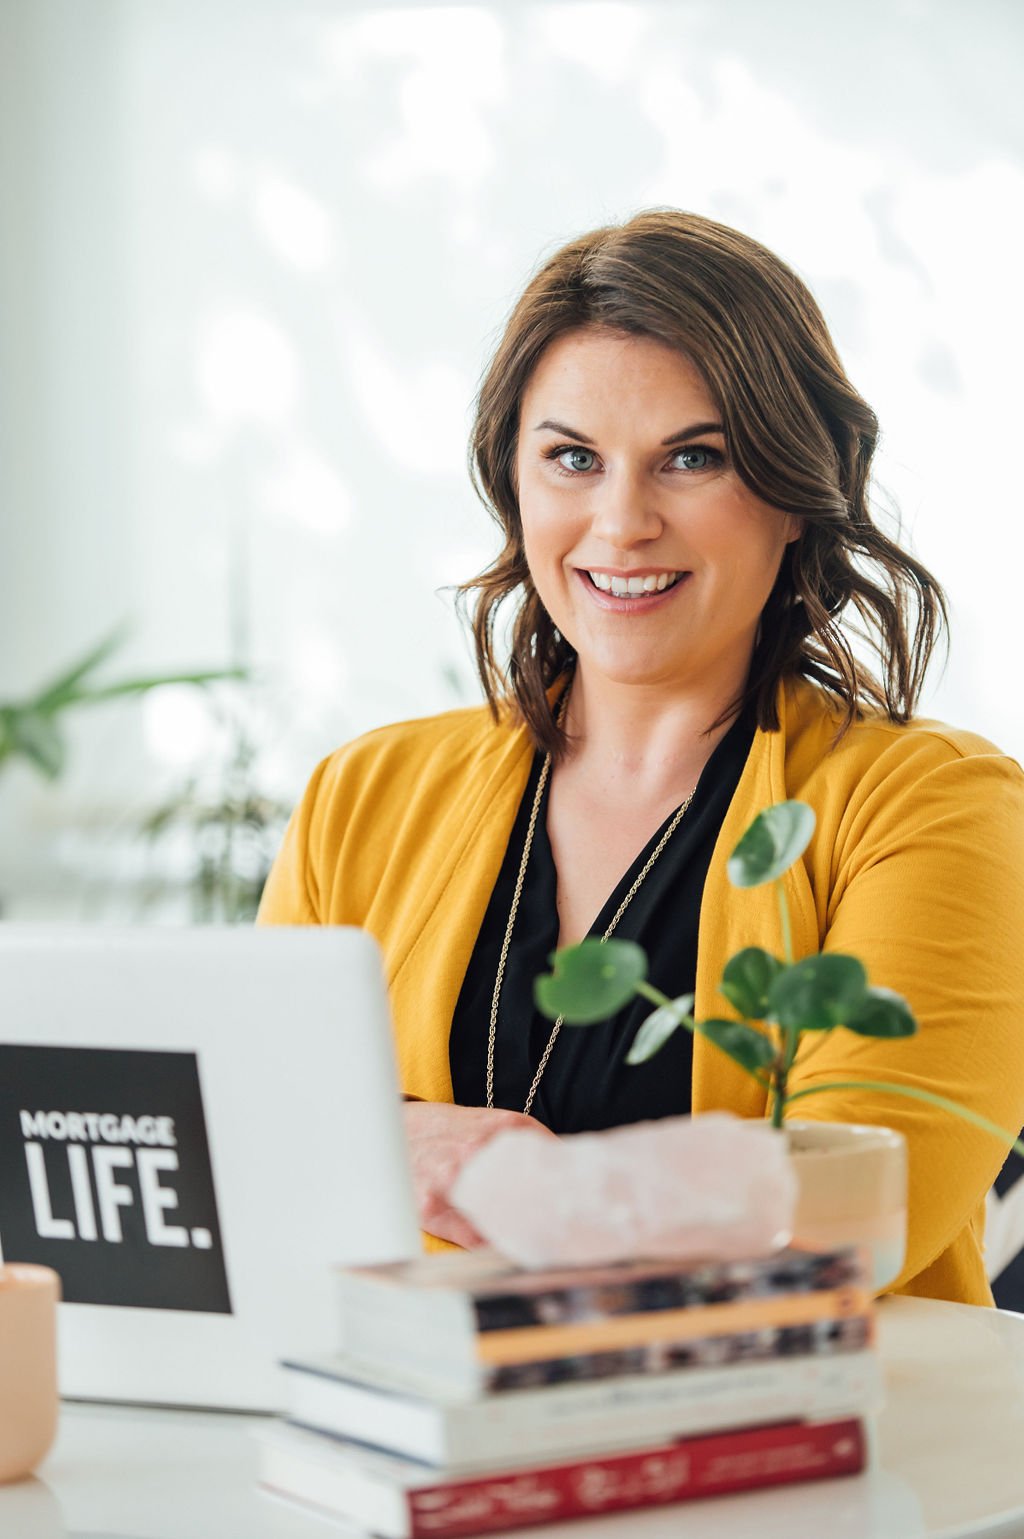 Business brand photography of a businesswoman at her desk with a laptop and a plant.